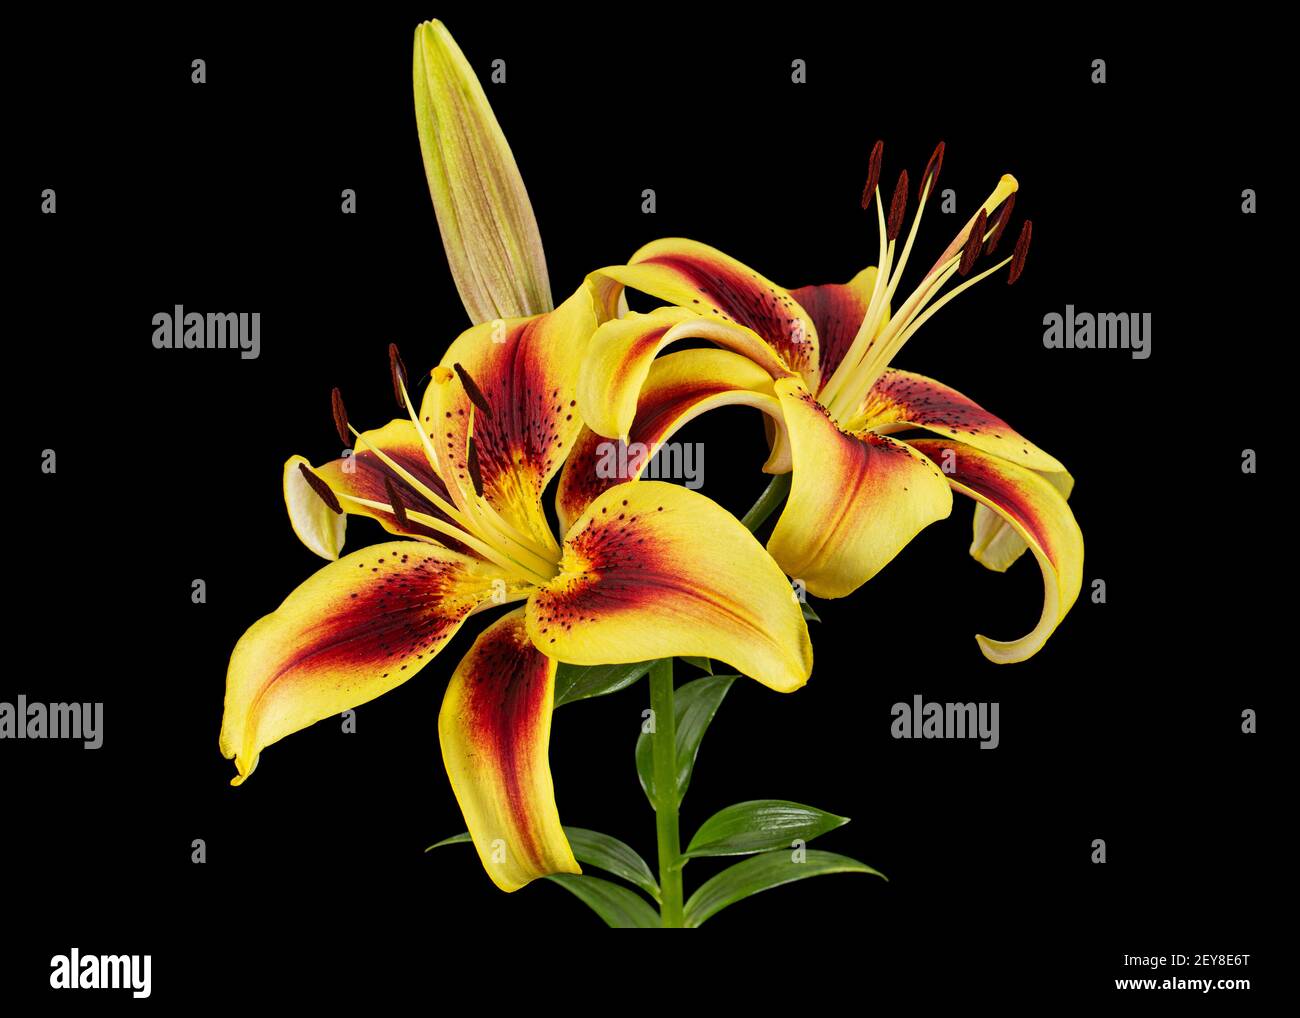 Yellow-burgundy flower of lily, isolated on black background Stock Photo